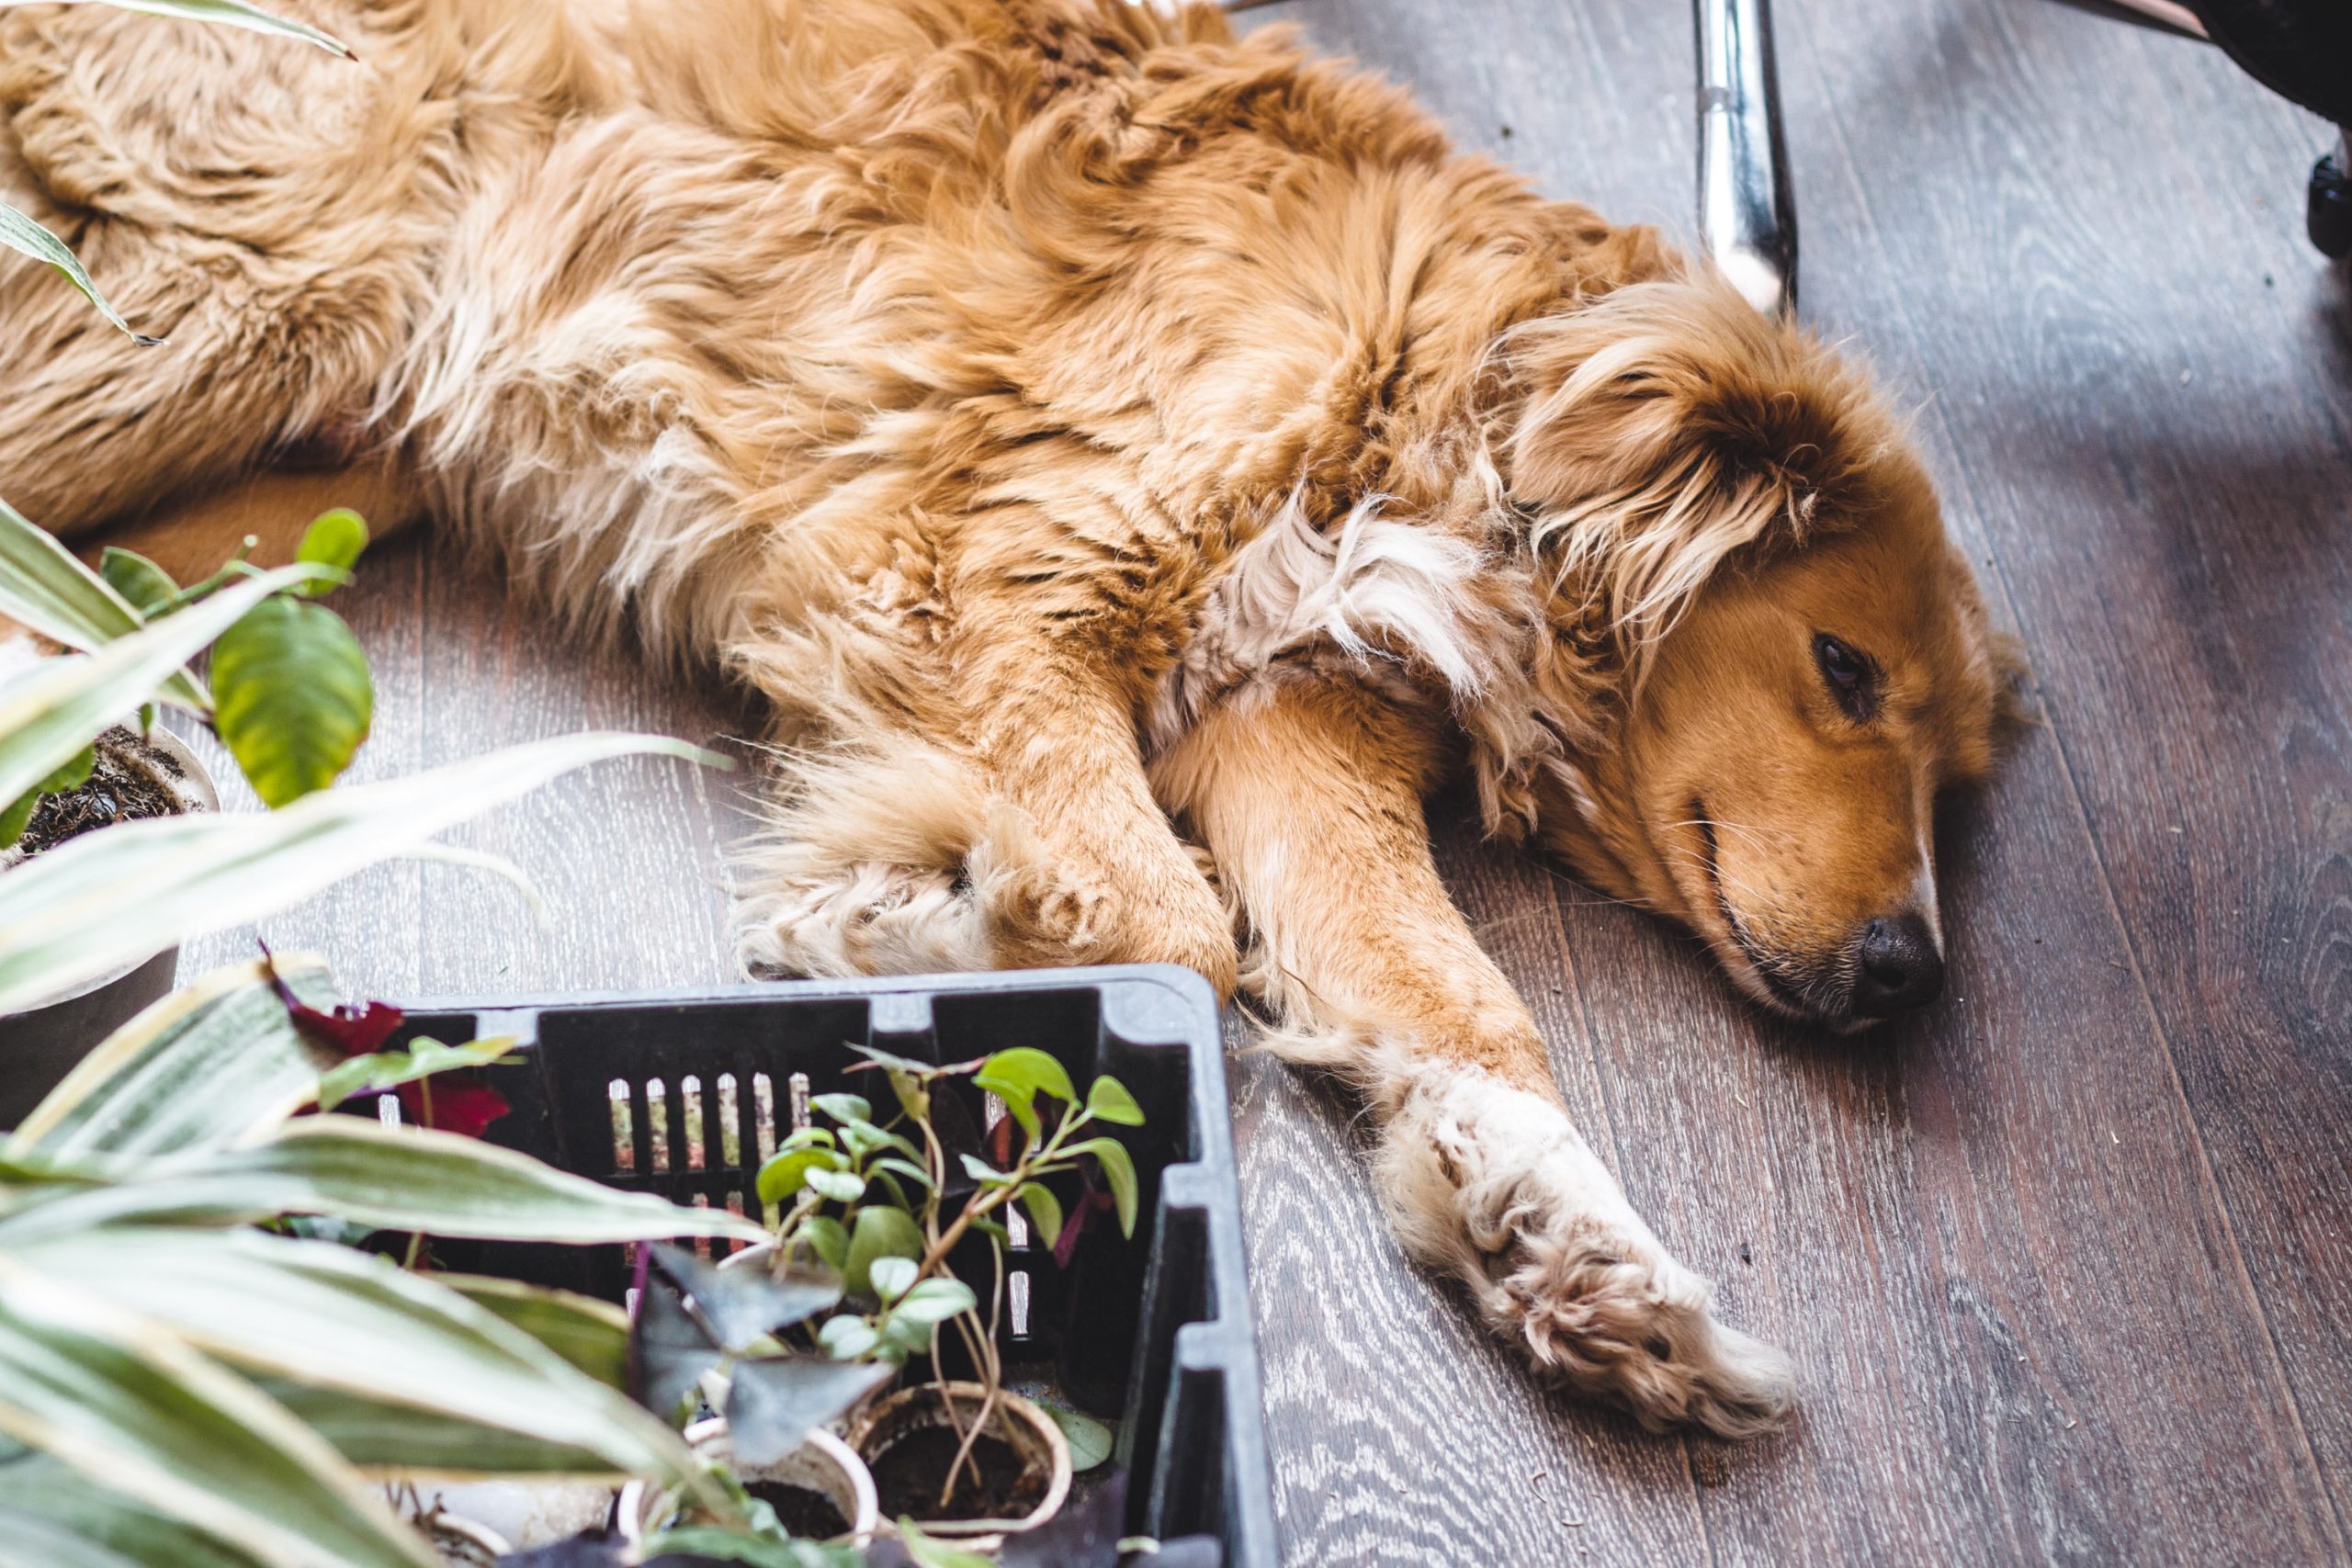 A Guide to Identifying and Preventing Toxic Plants for Dogs